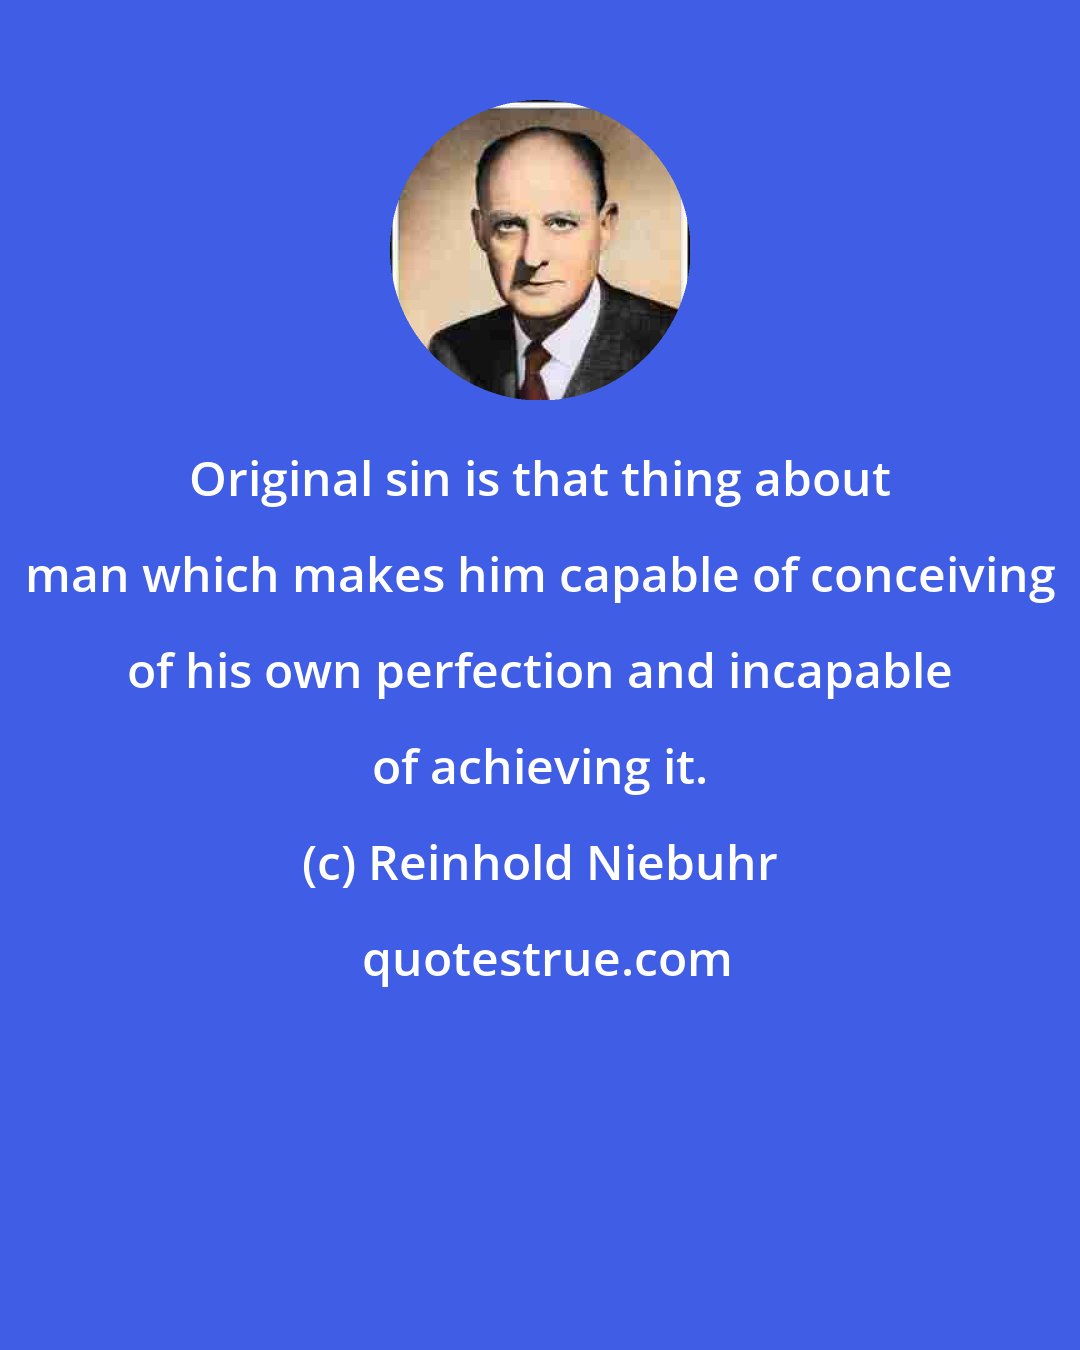 Reinhold Niebuhr: Original sin is that thing about man which makes him capable of conceiving of his own perfection and incapable of achieving it.